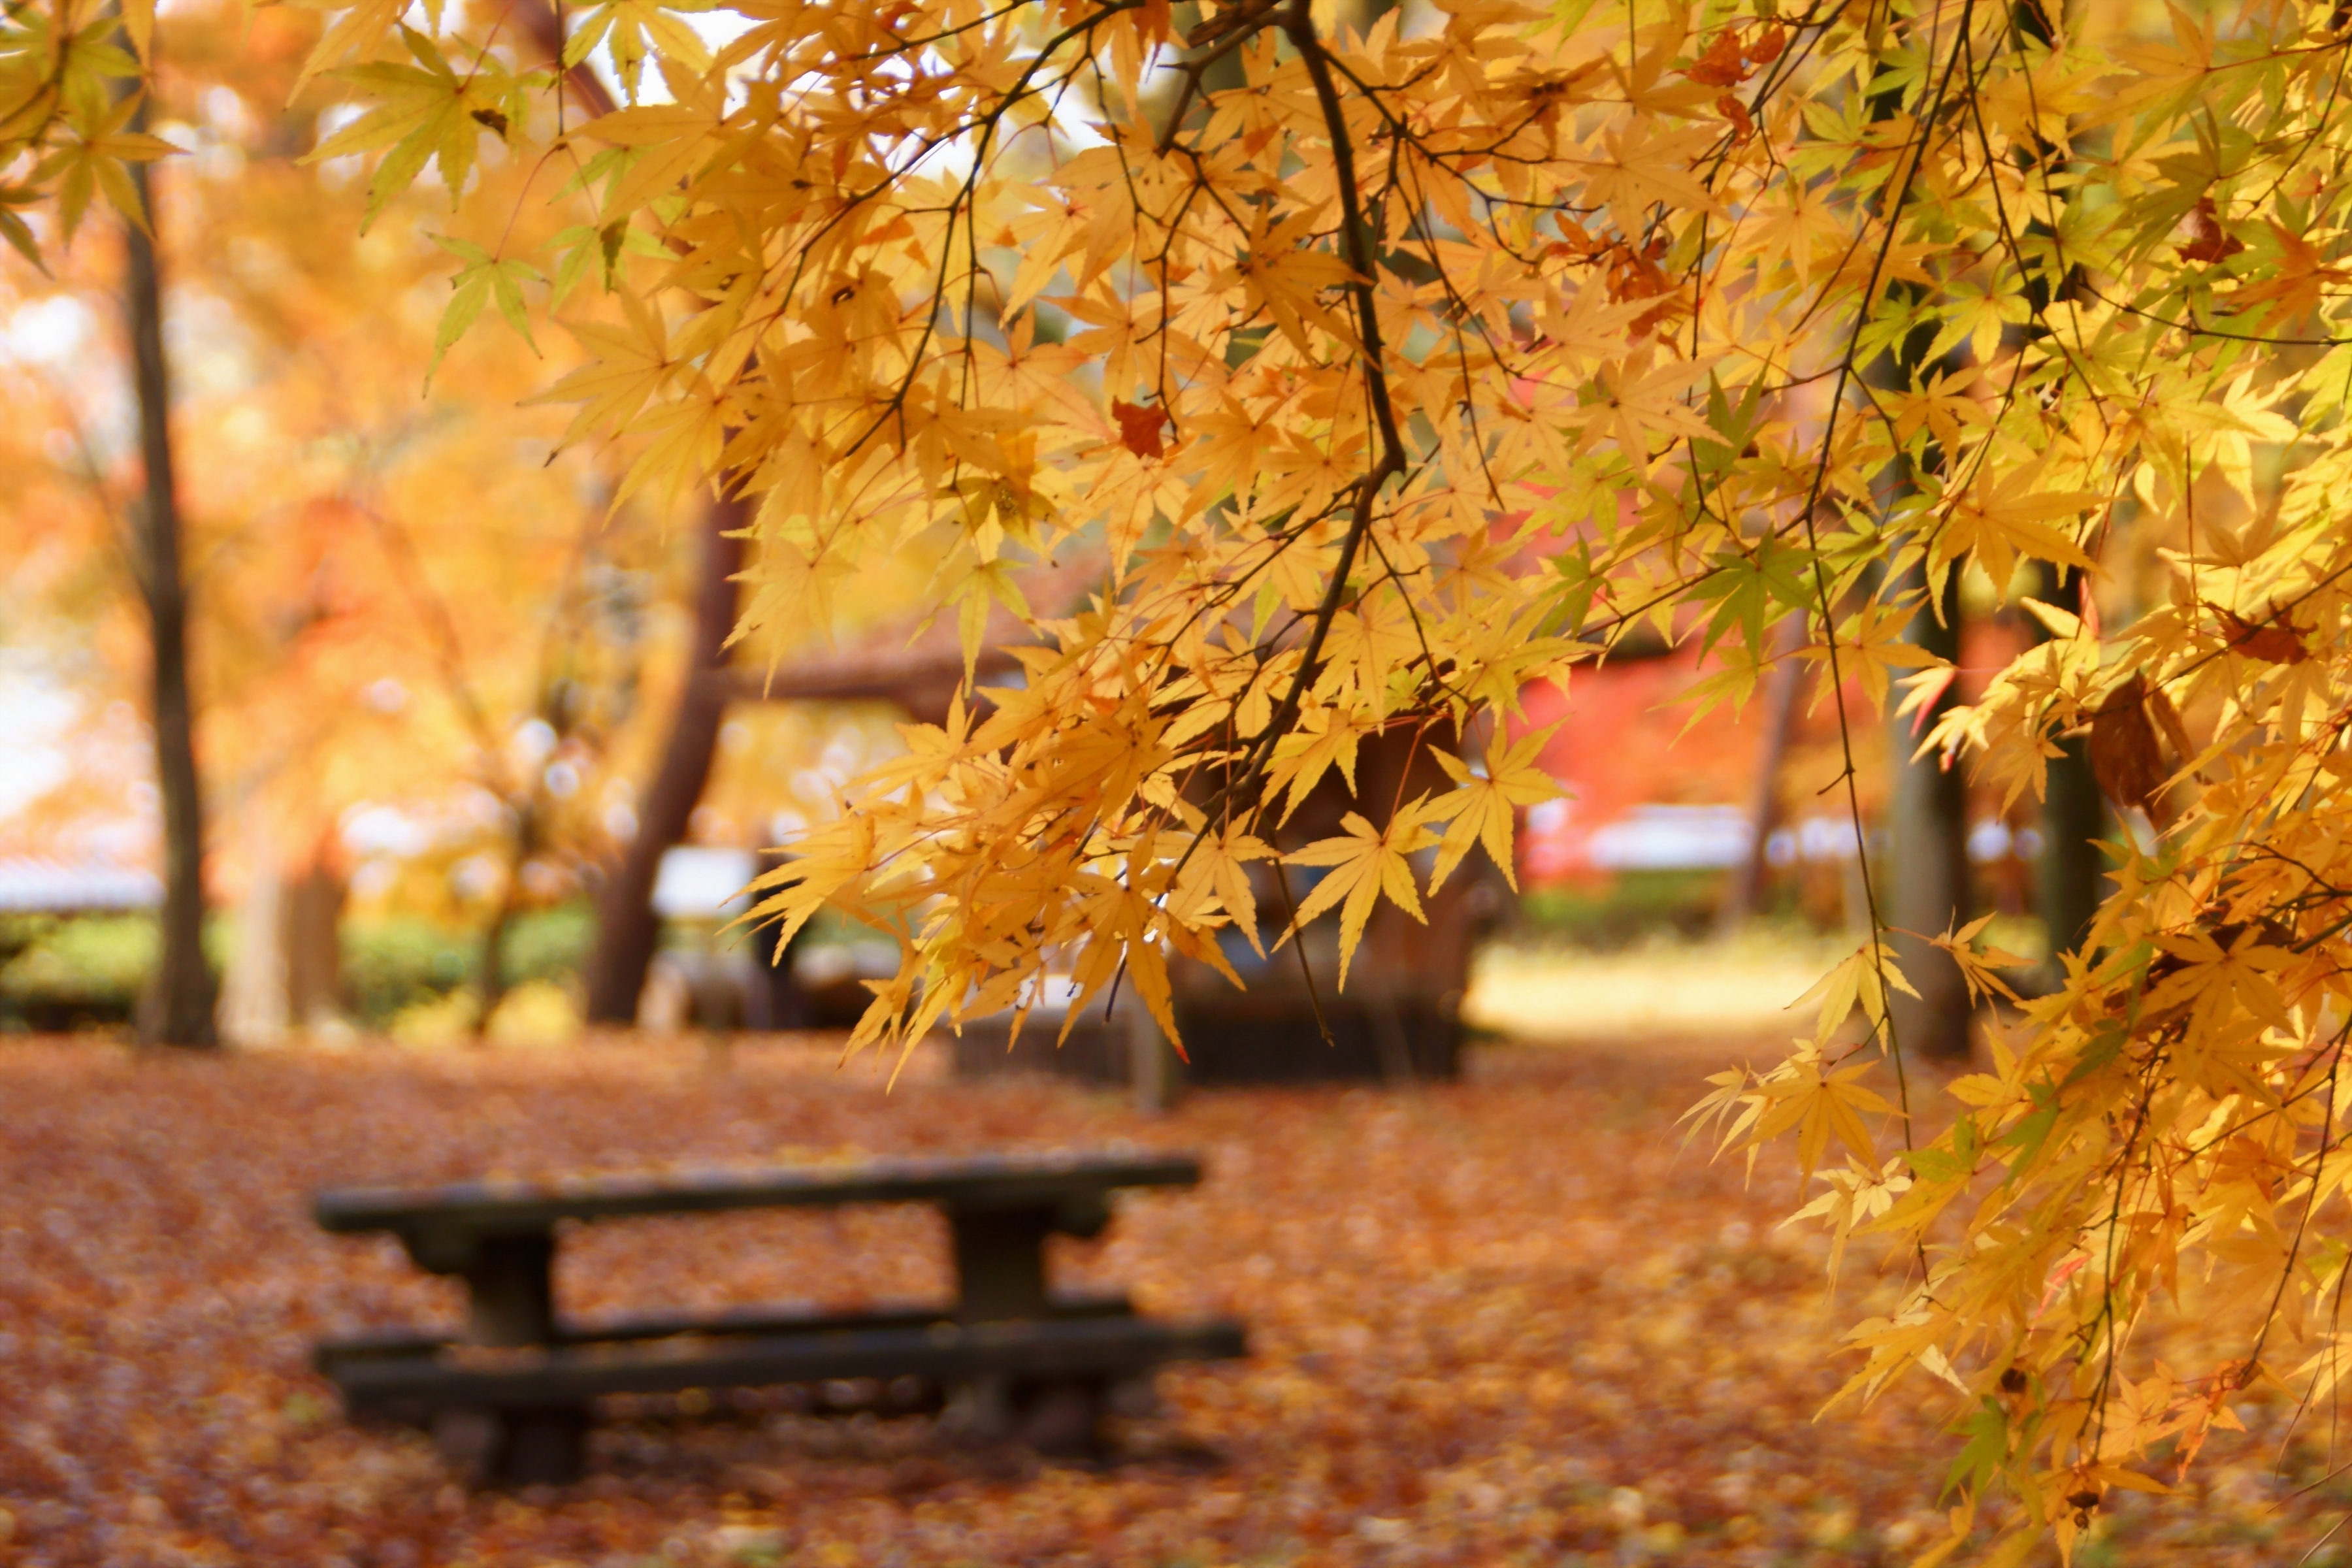 Resolution Desktop Wallpaper Of Autumn Maple Leaves Picture Yellow